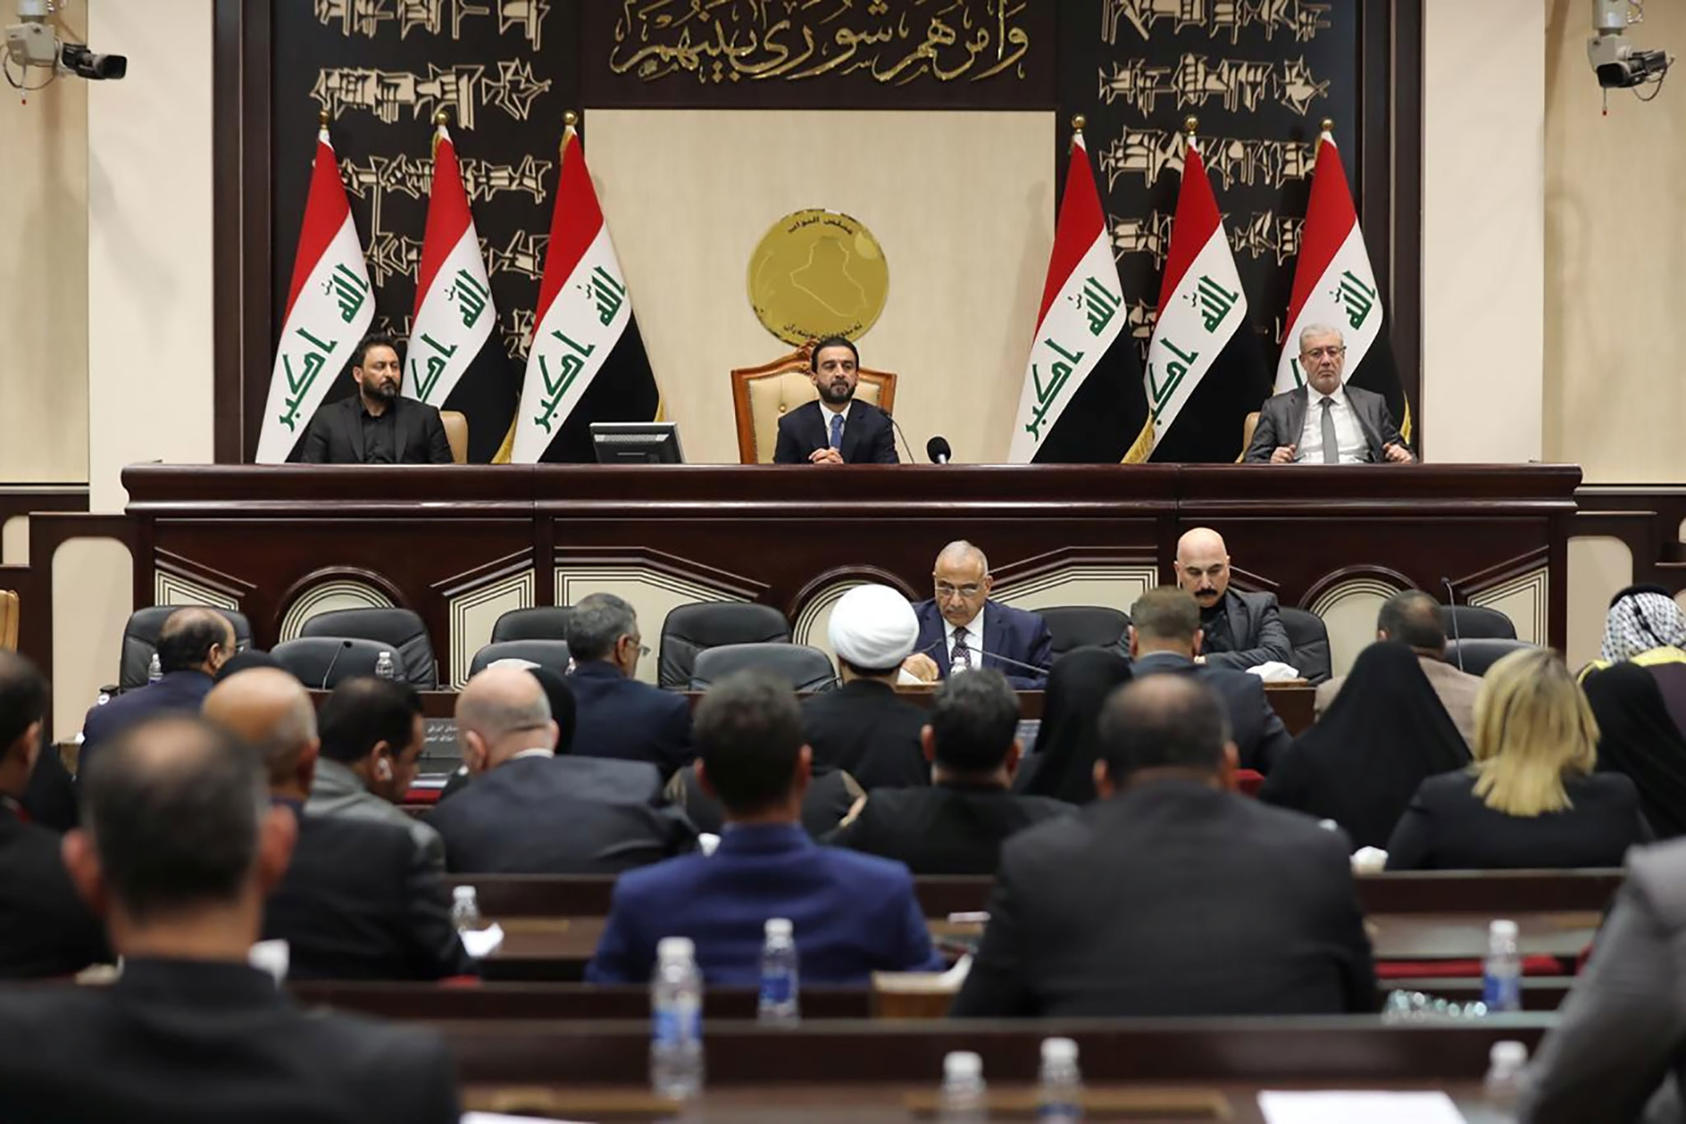 A meeting of the parliament of Iraq in Baghdad, Jan. 5, 2020. (Iraqi Prime Minister's Press Office via The New York Times)